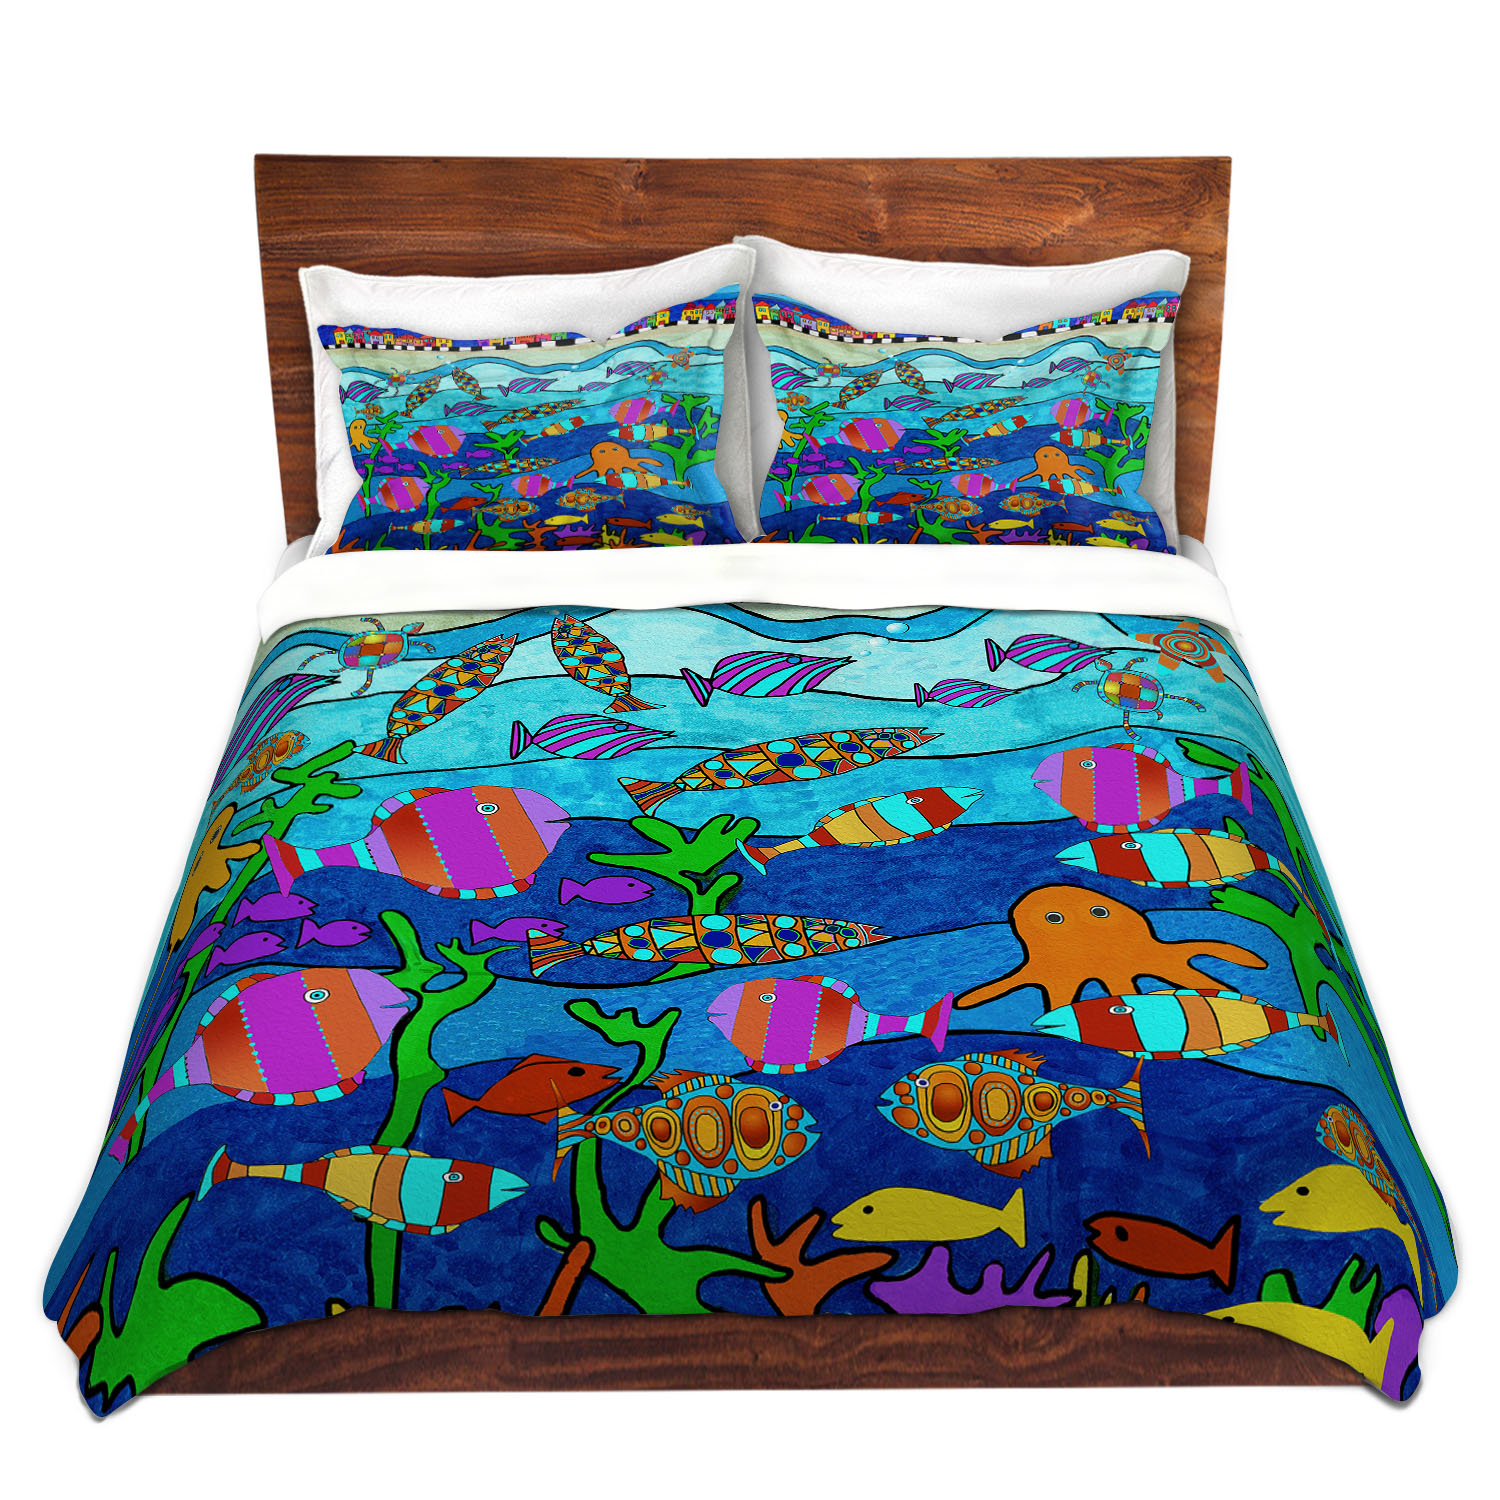 Dianoche Microfiber Duvet Covers By Dora Ficher - Little Houses By The Sea